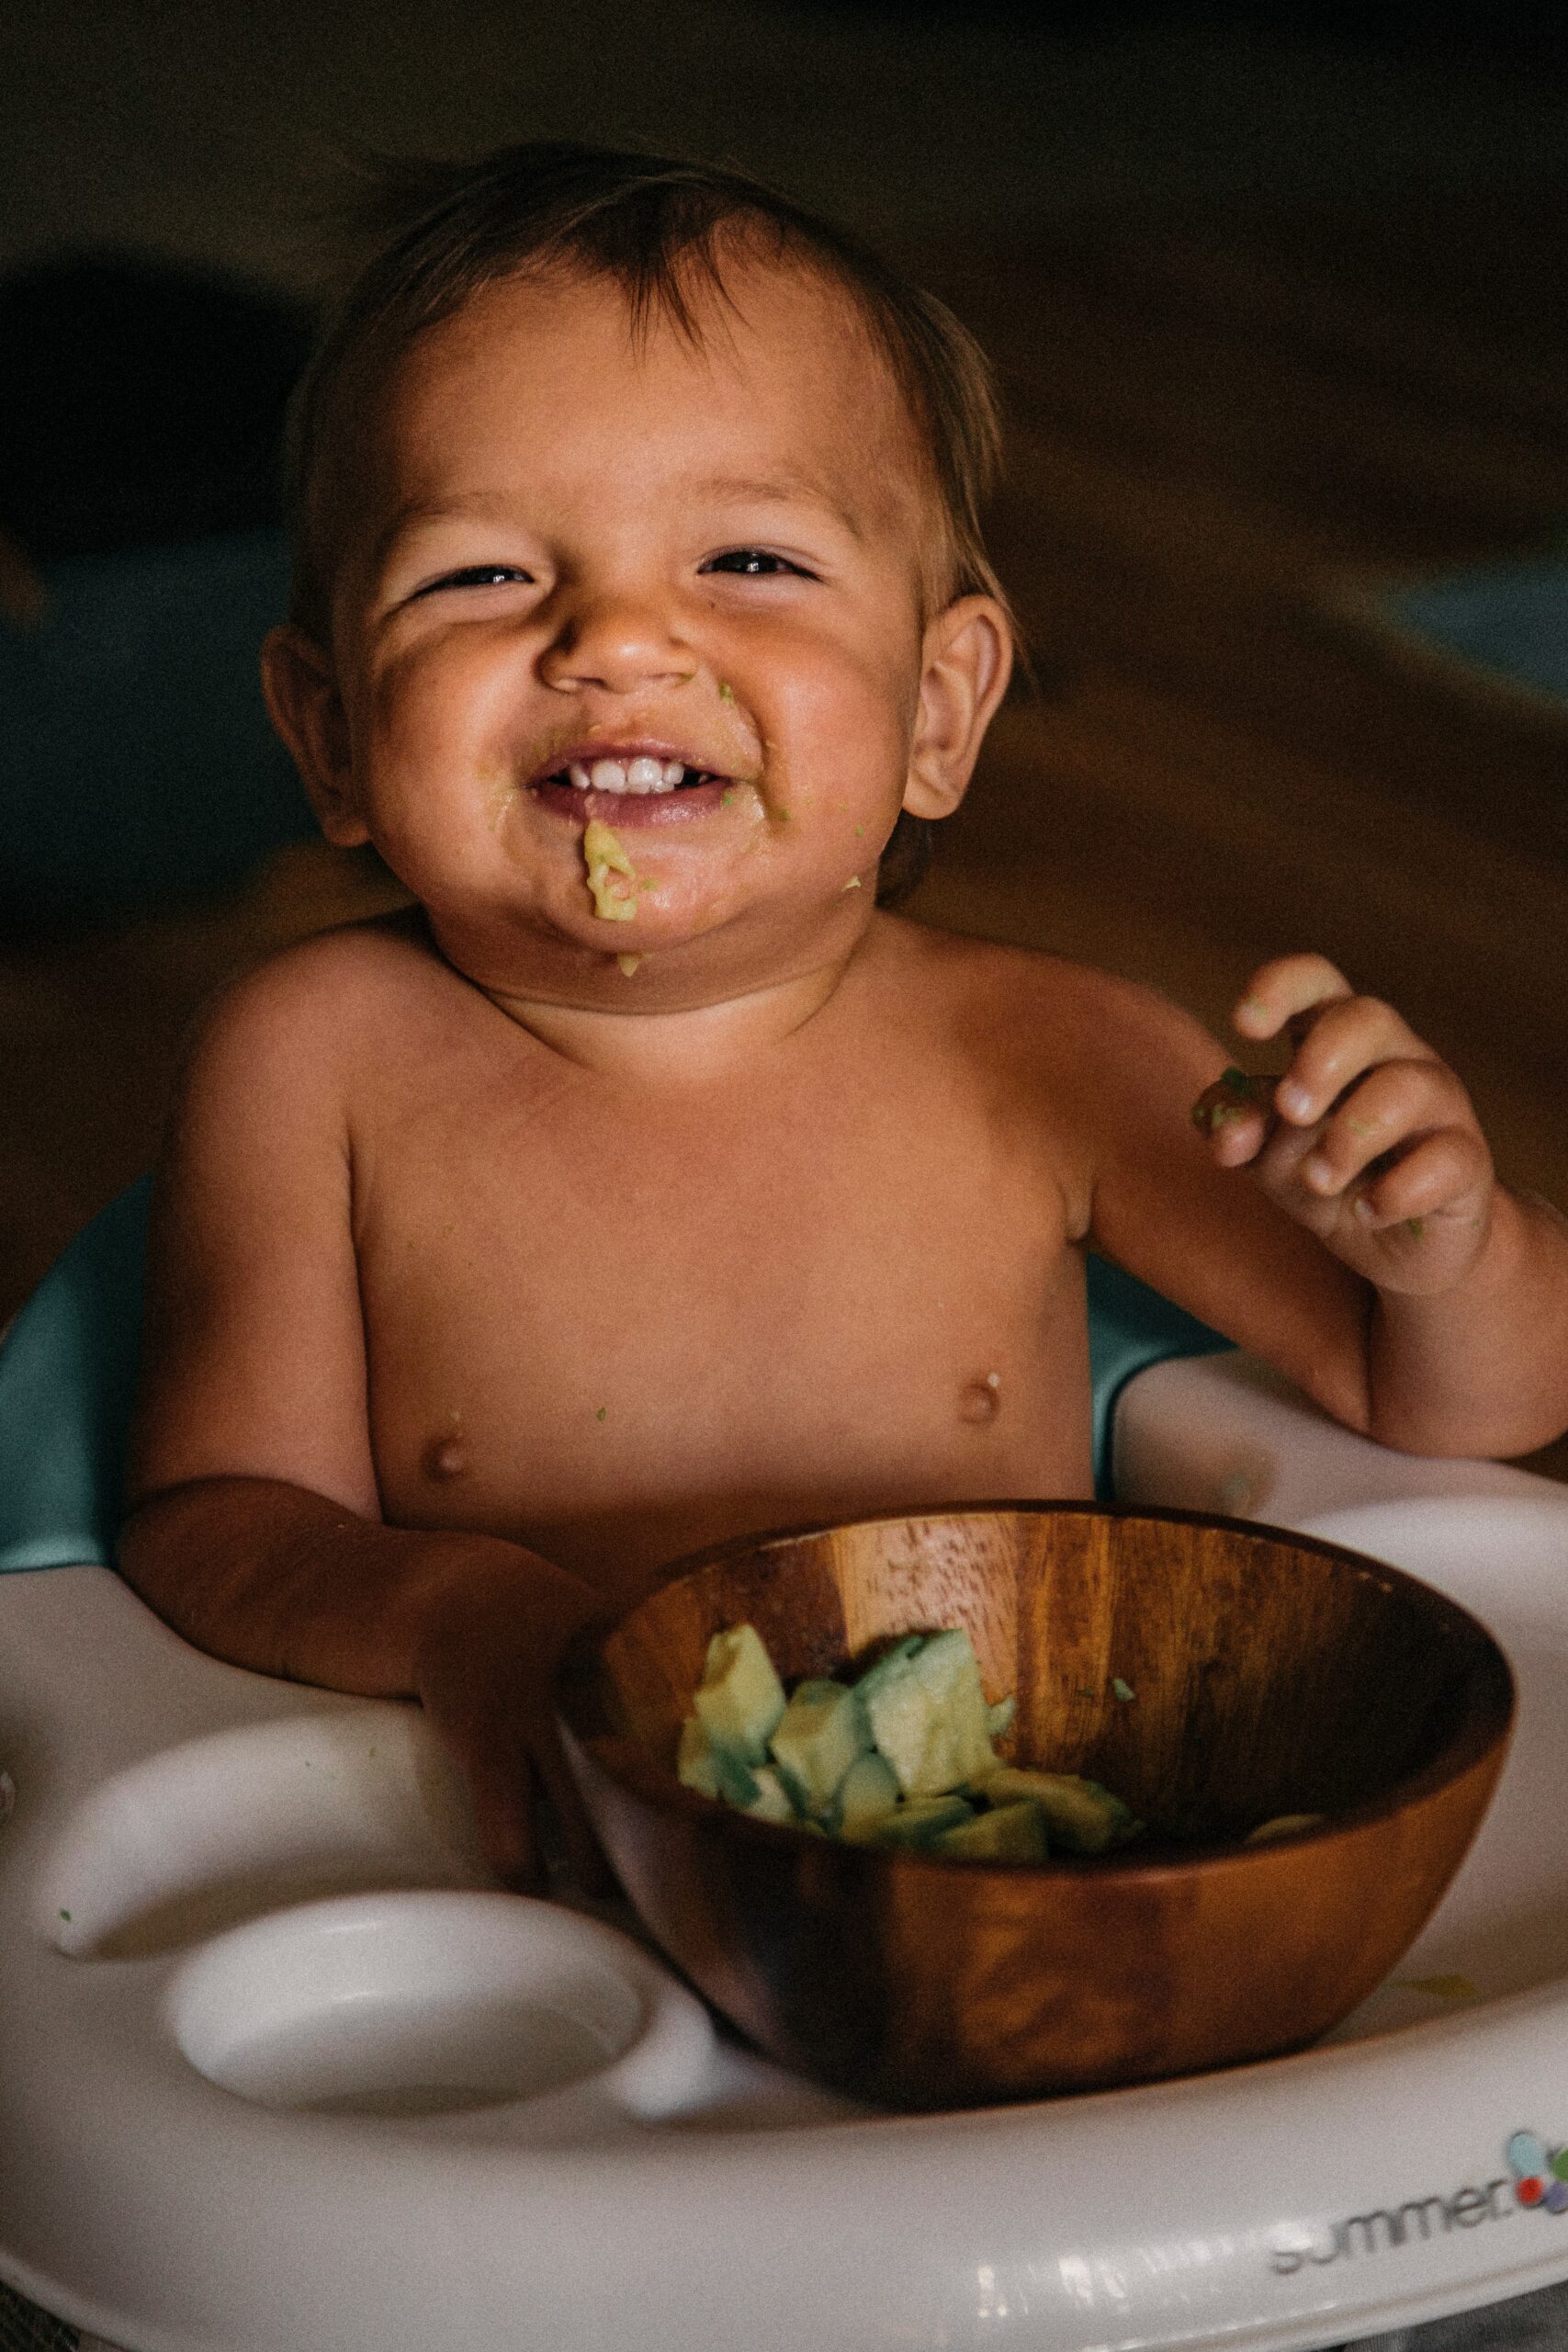 Organic Baby Food: Better for Your Baby?